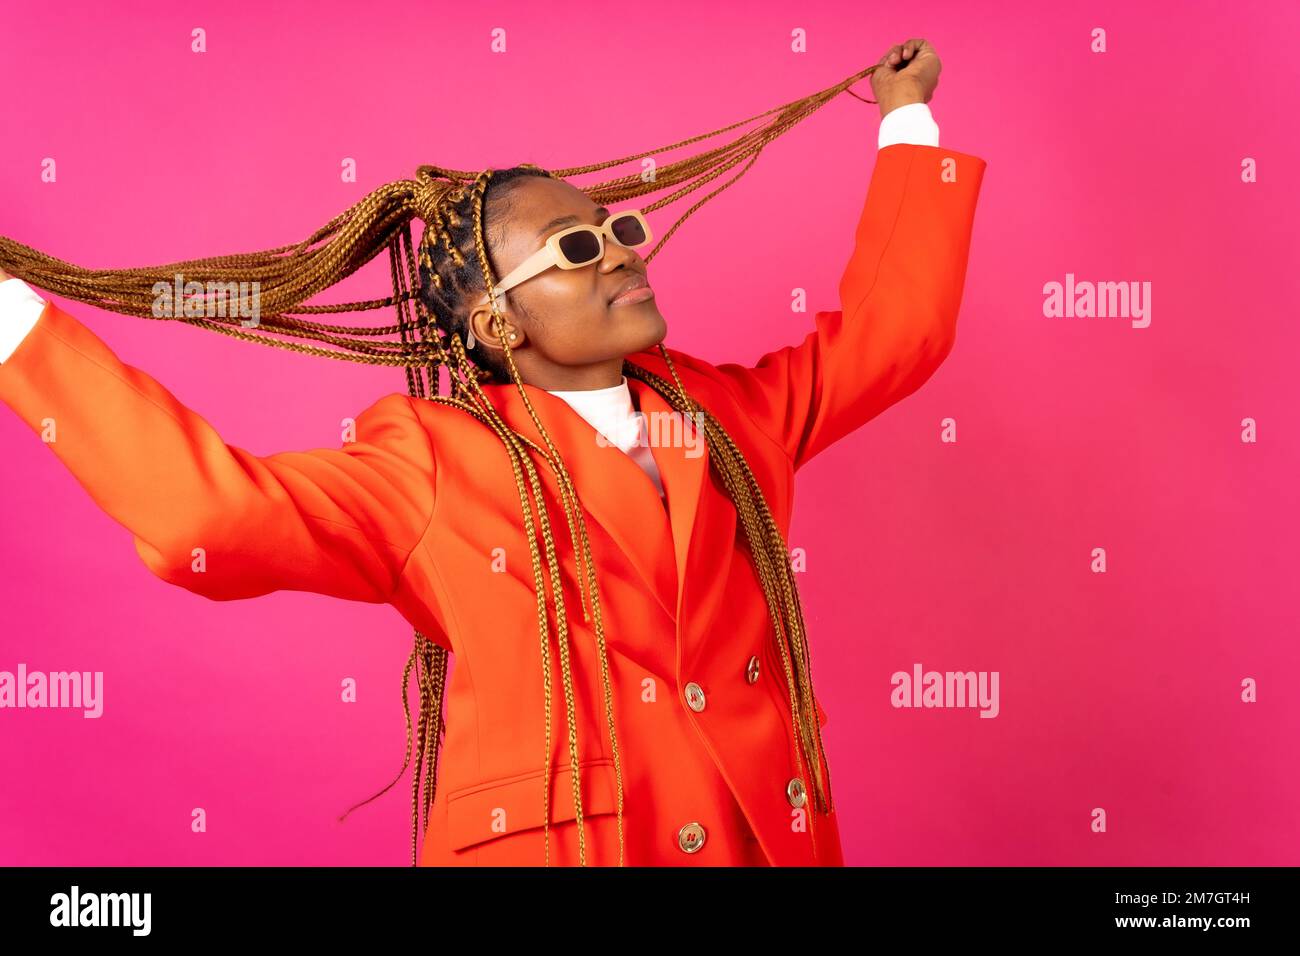 African young woman with braids on a pink background, in a red suit having fun and dancing Stock Photo